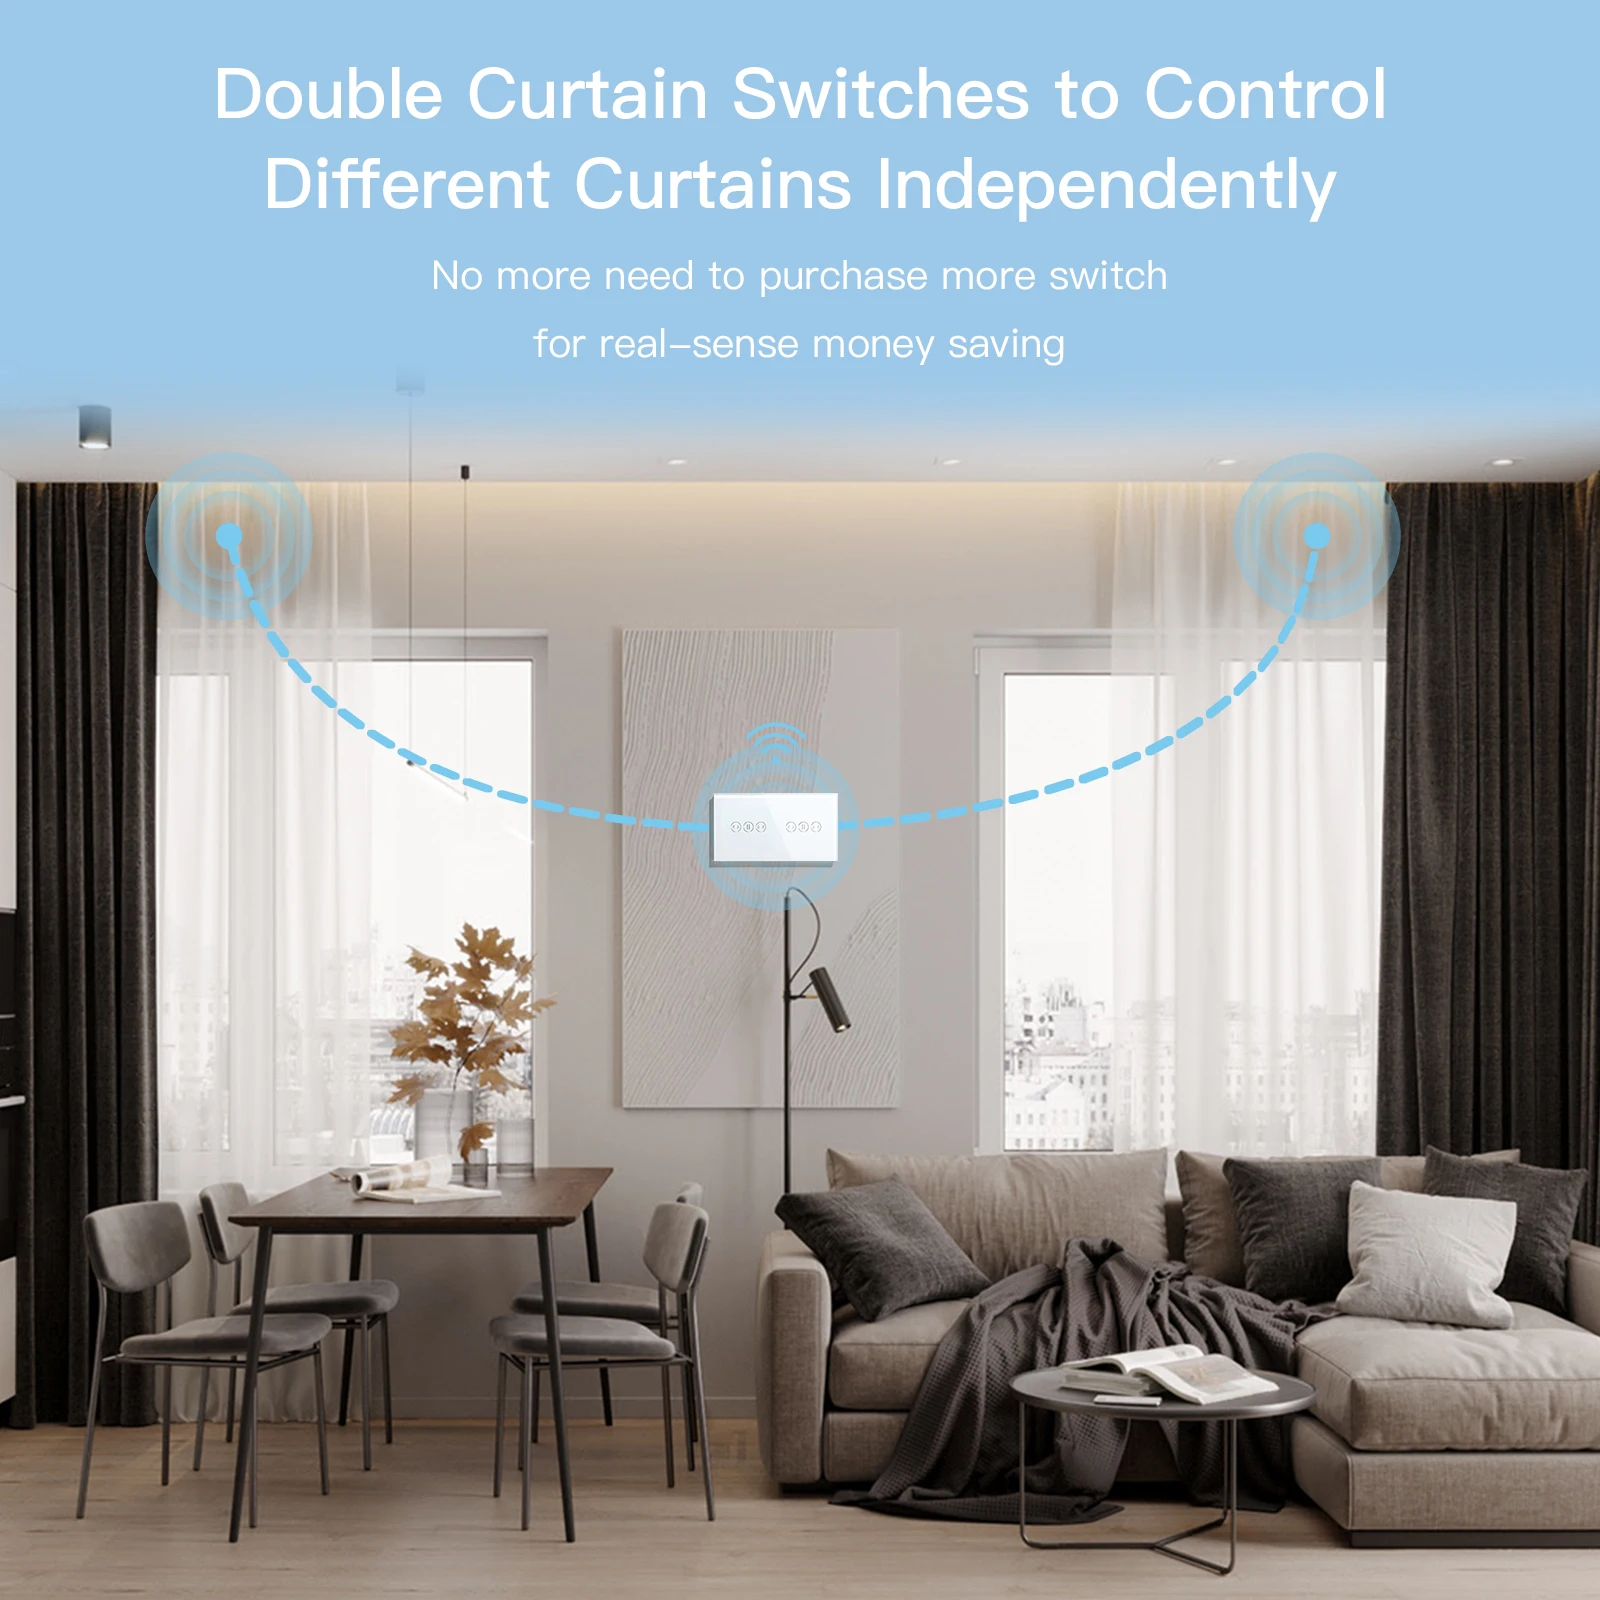 BSEED Wifi Roller Shutter Switch Touch Blinds Switch Smart Light Switches  Function Parts Glass Panel DIY Free Combination